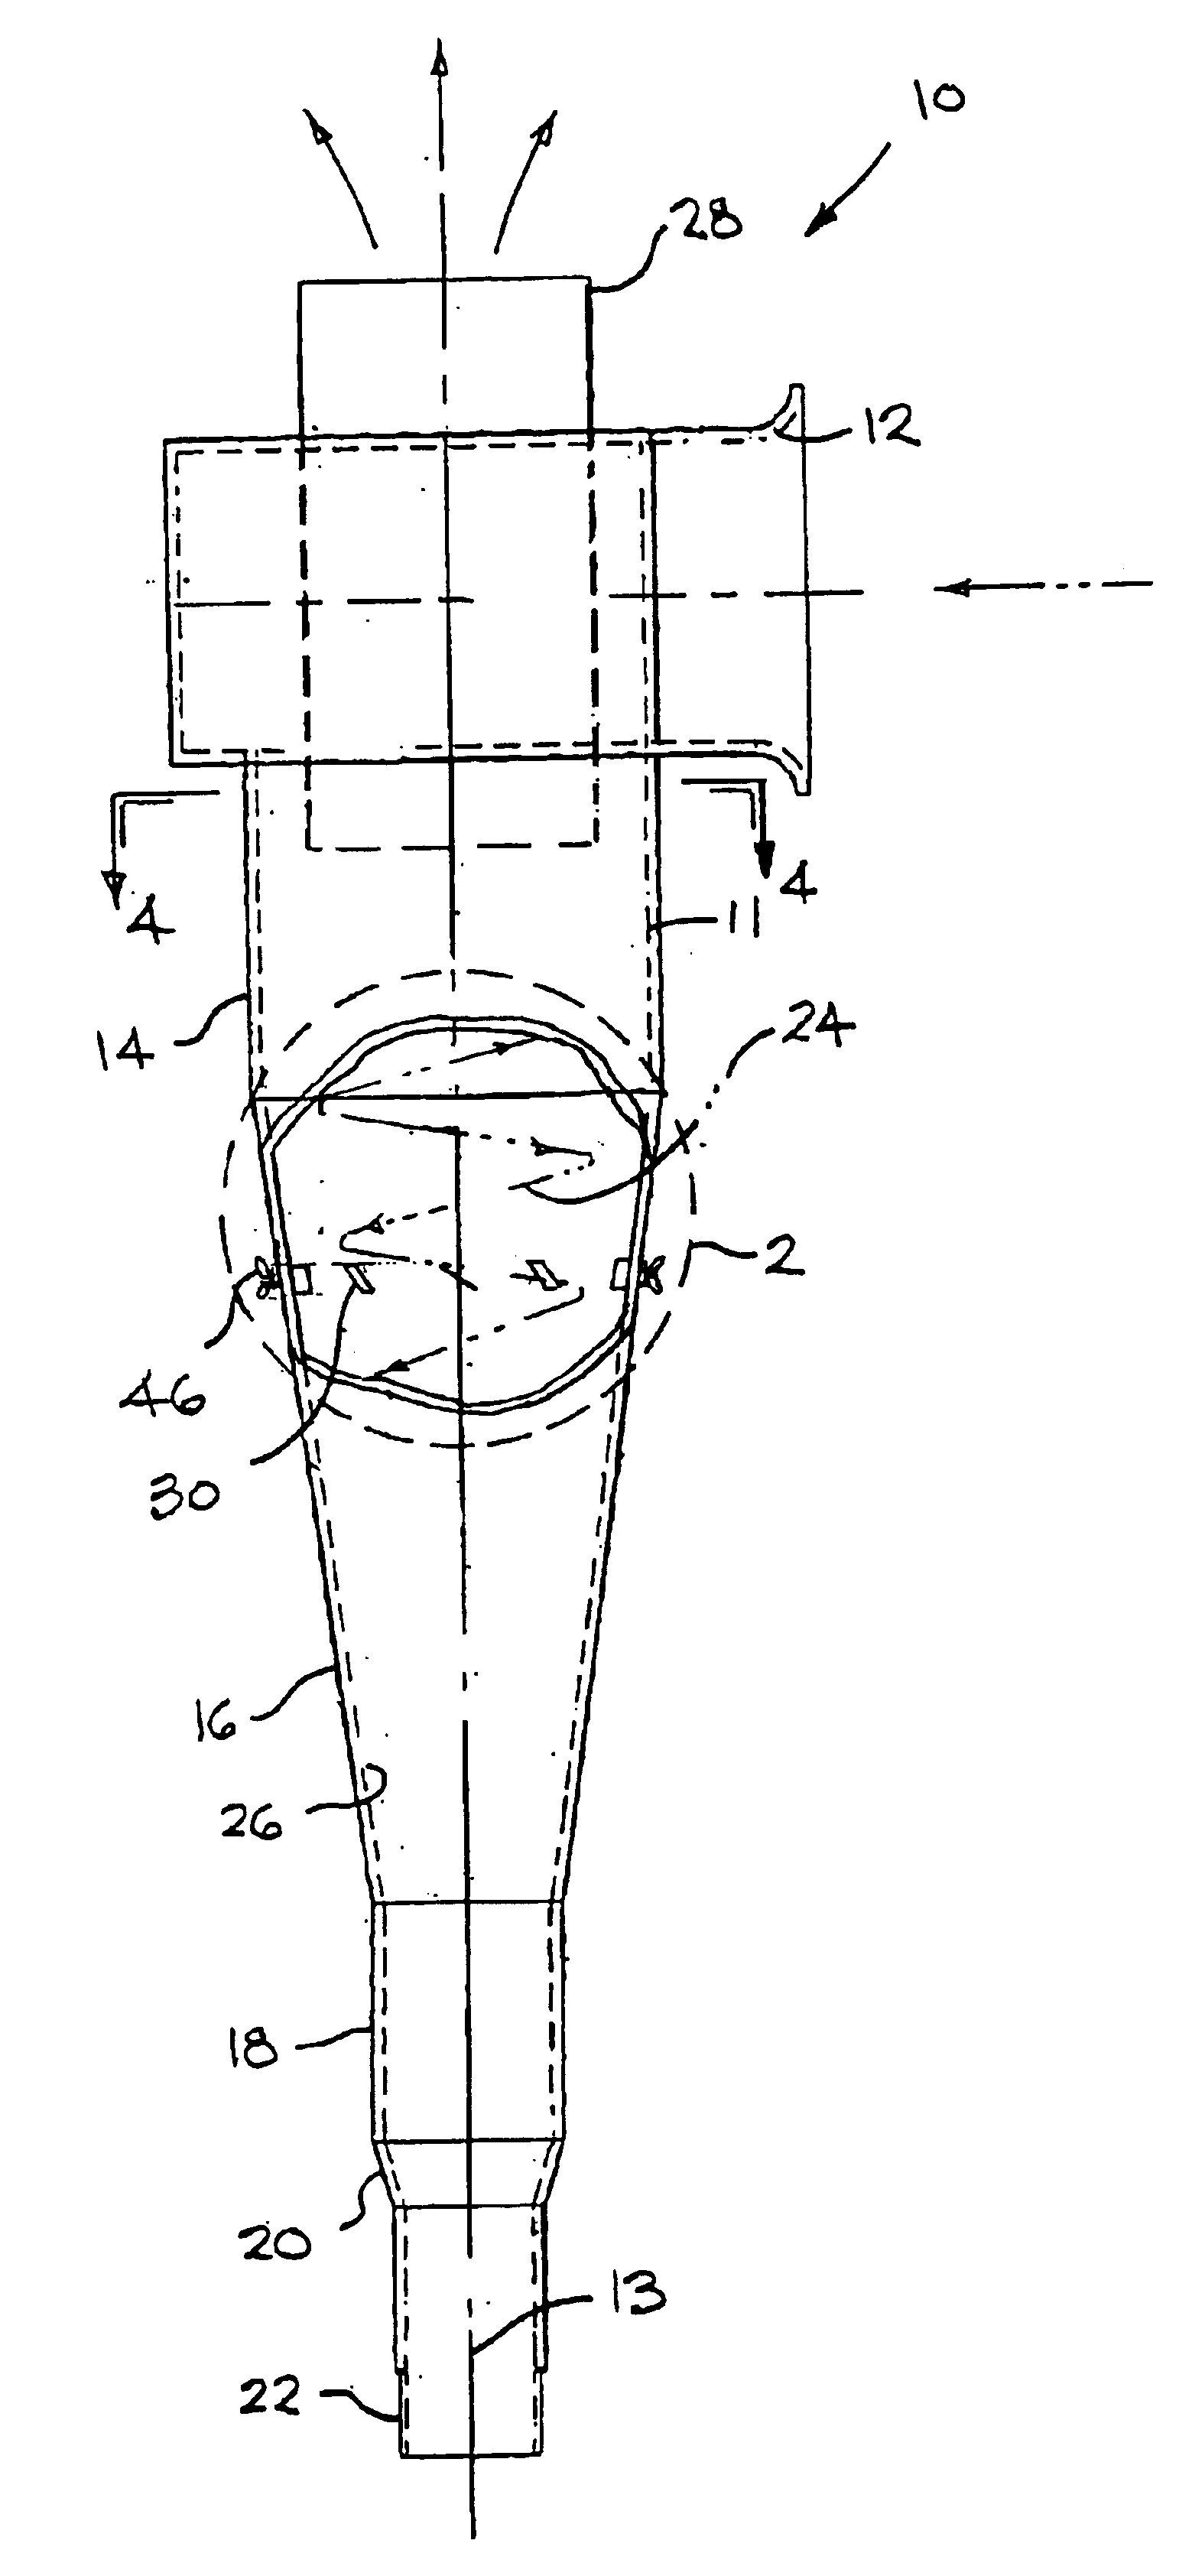 Cyclone separator with surface vanes